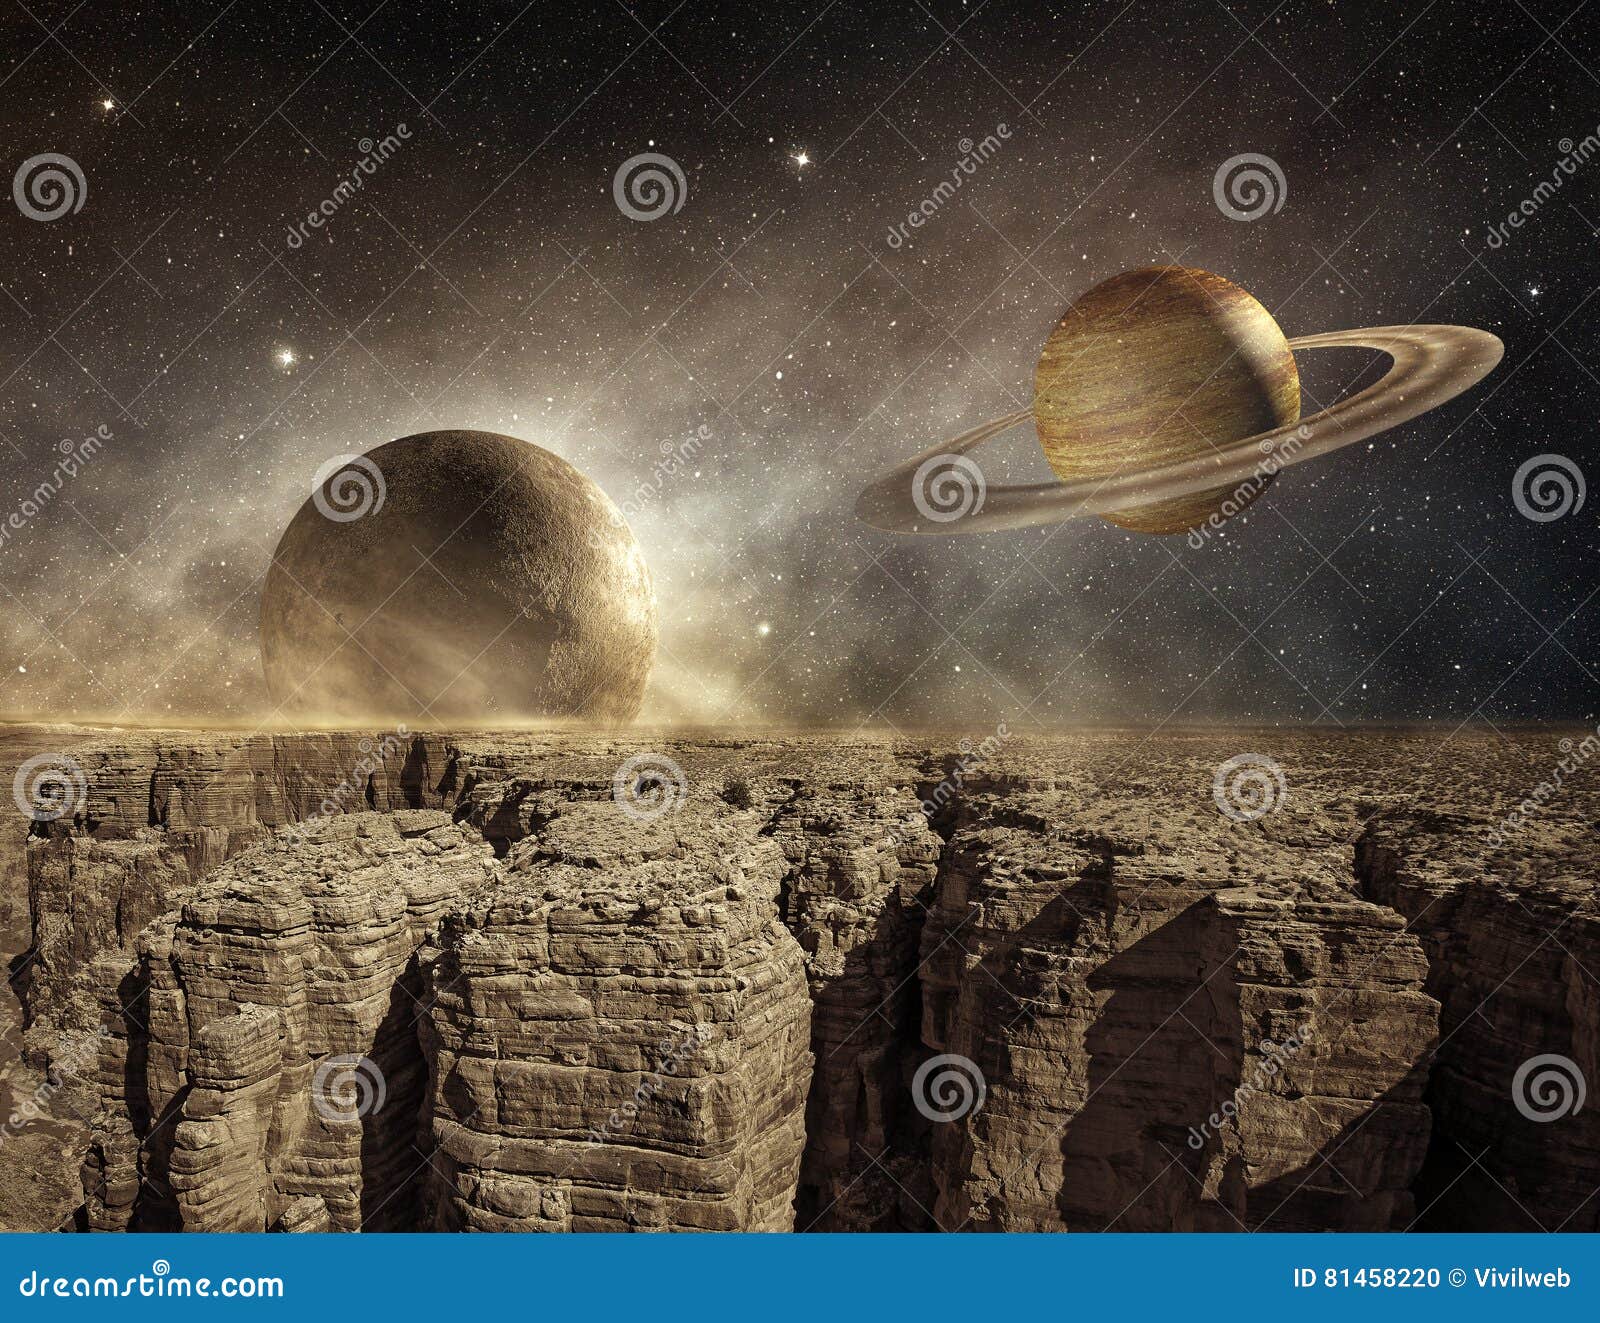 planets in the sky of a barren landscape